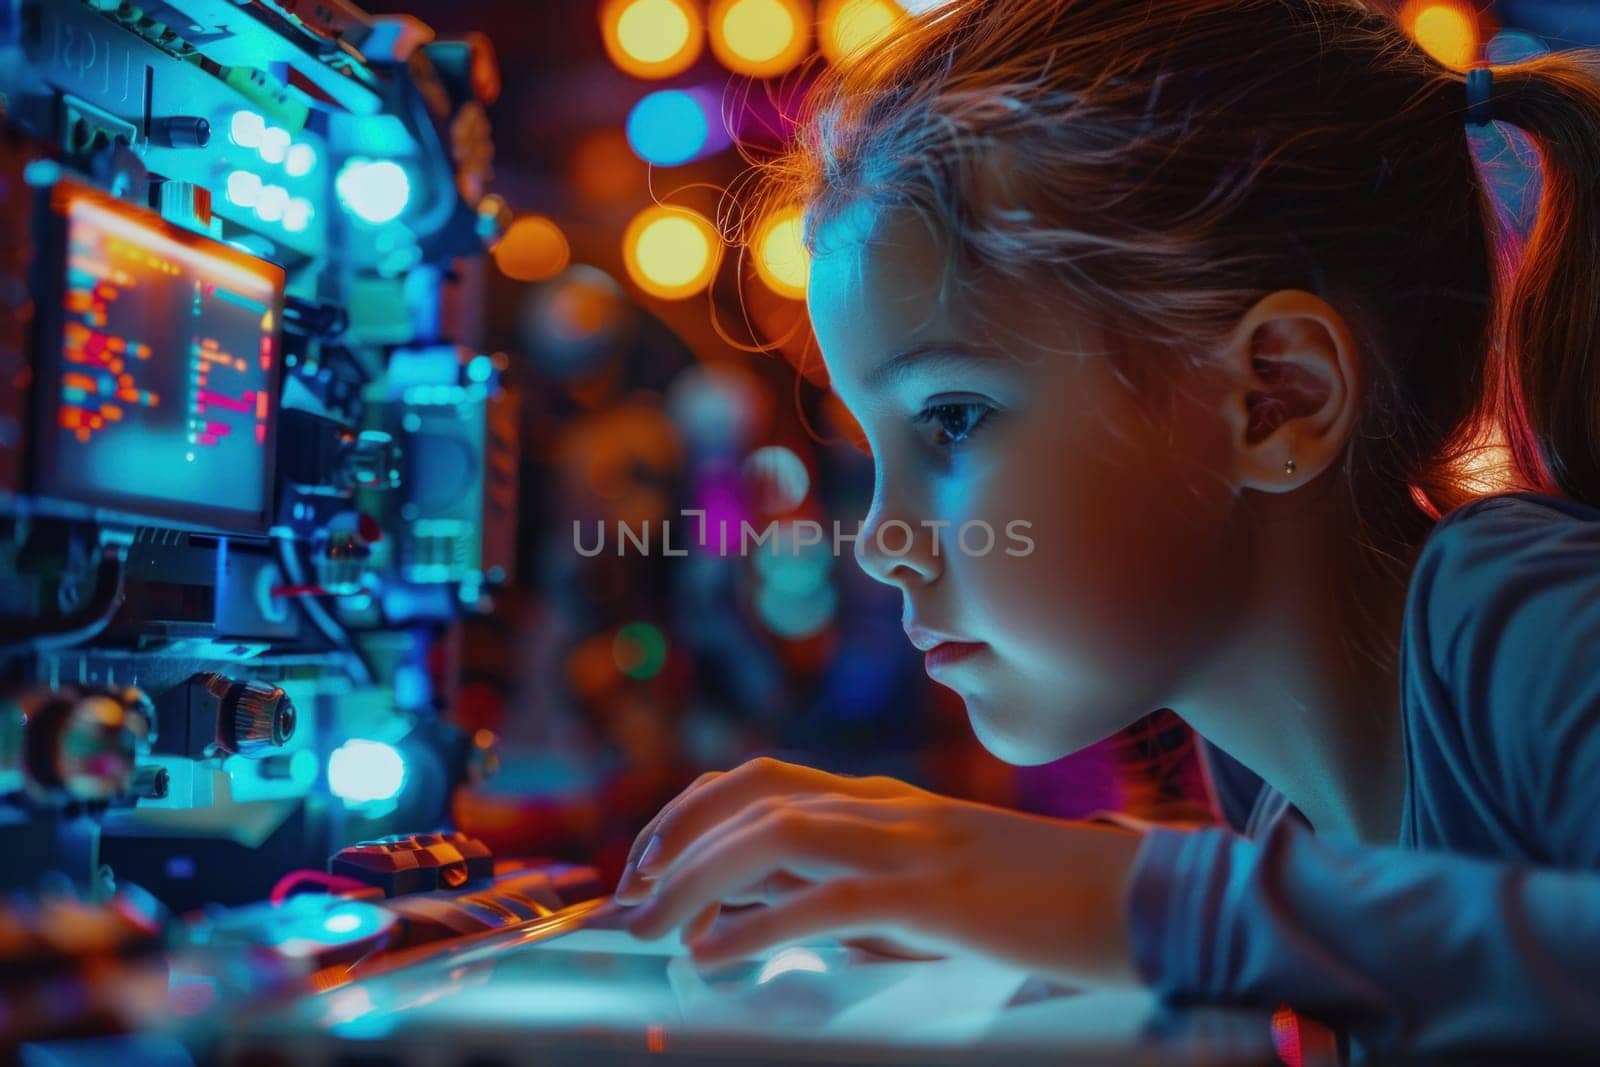 A young girl sits in a brightly lit room, focused on using a laptop computer.